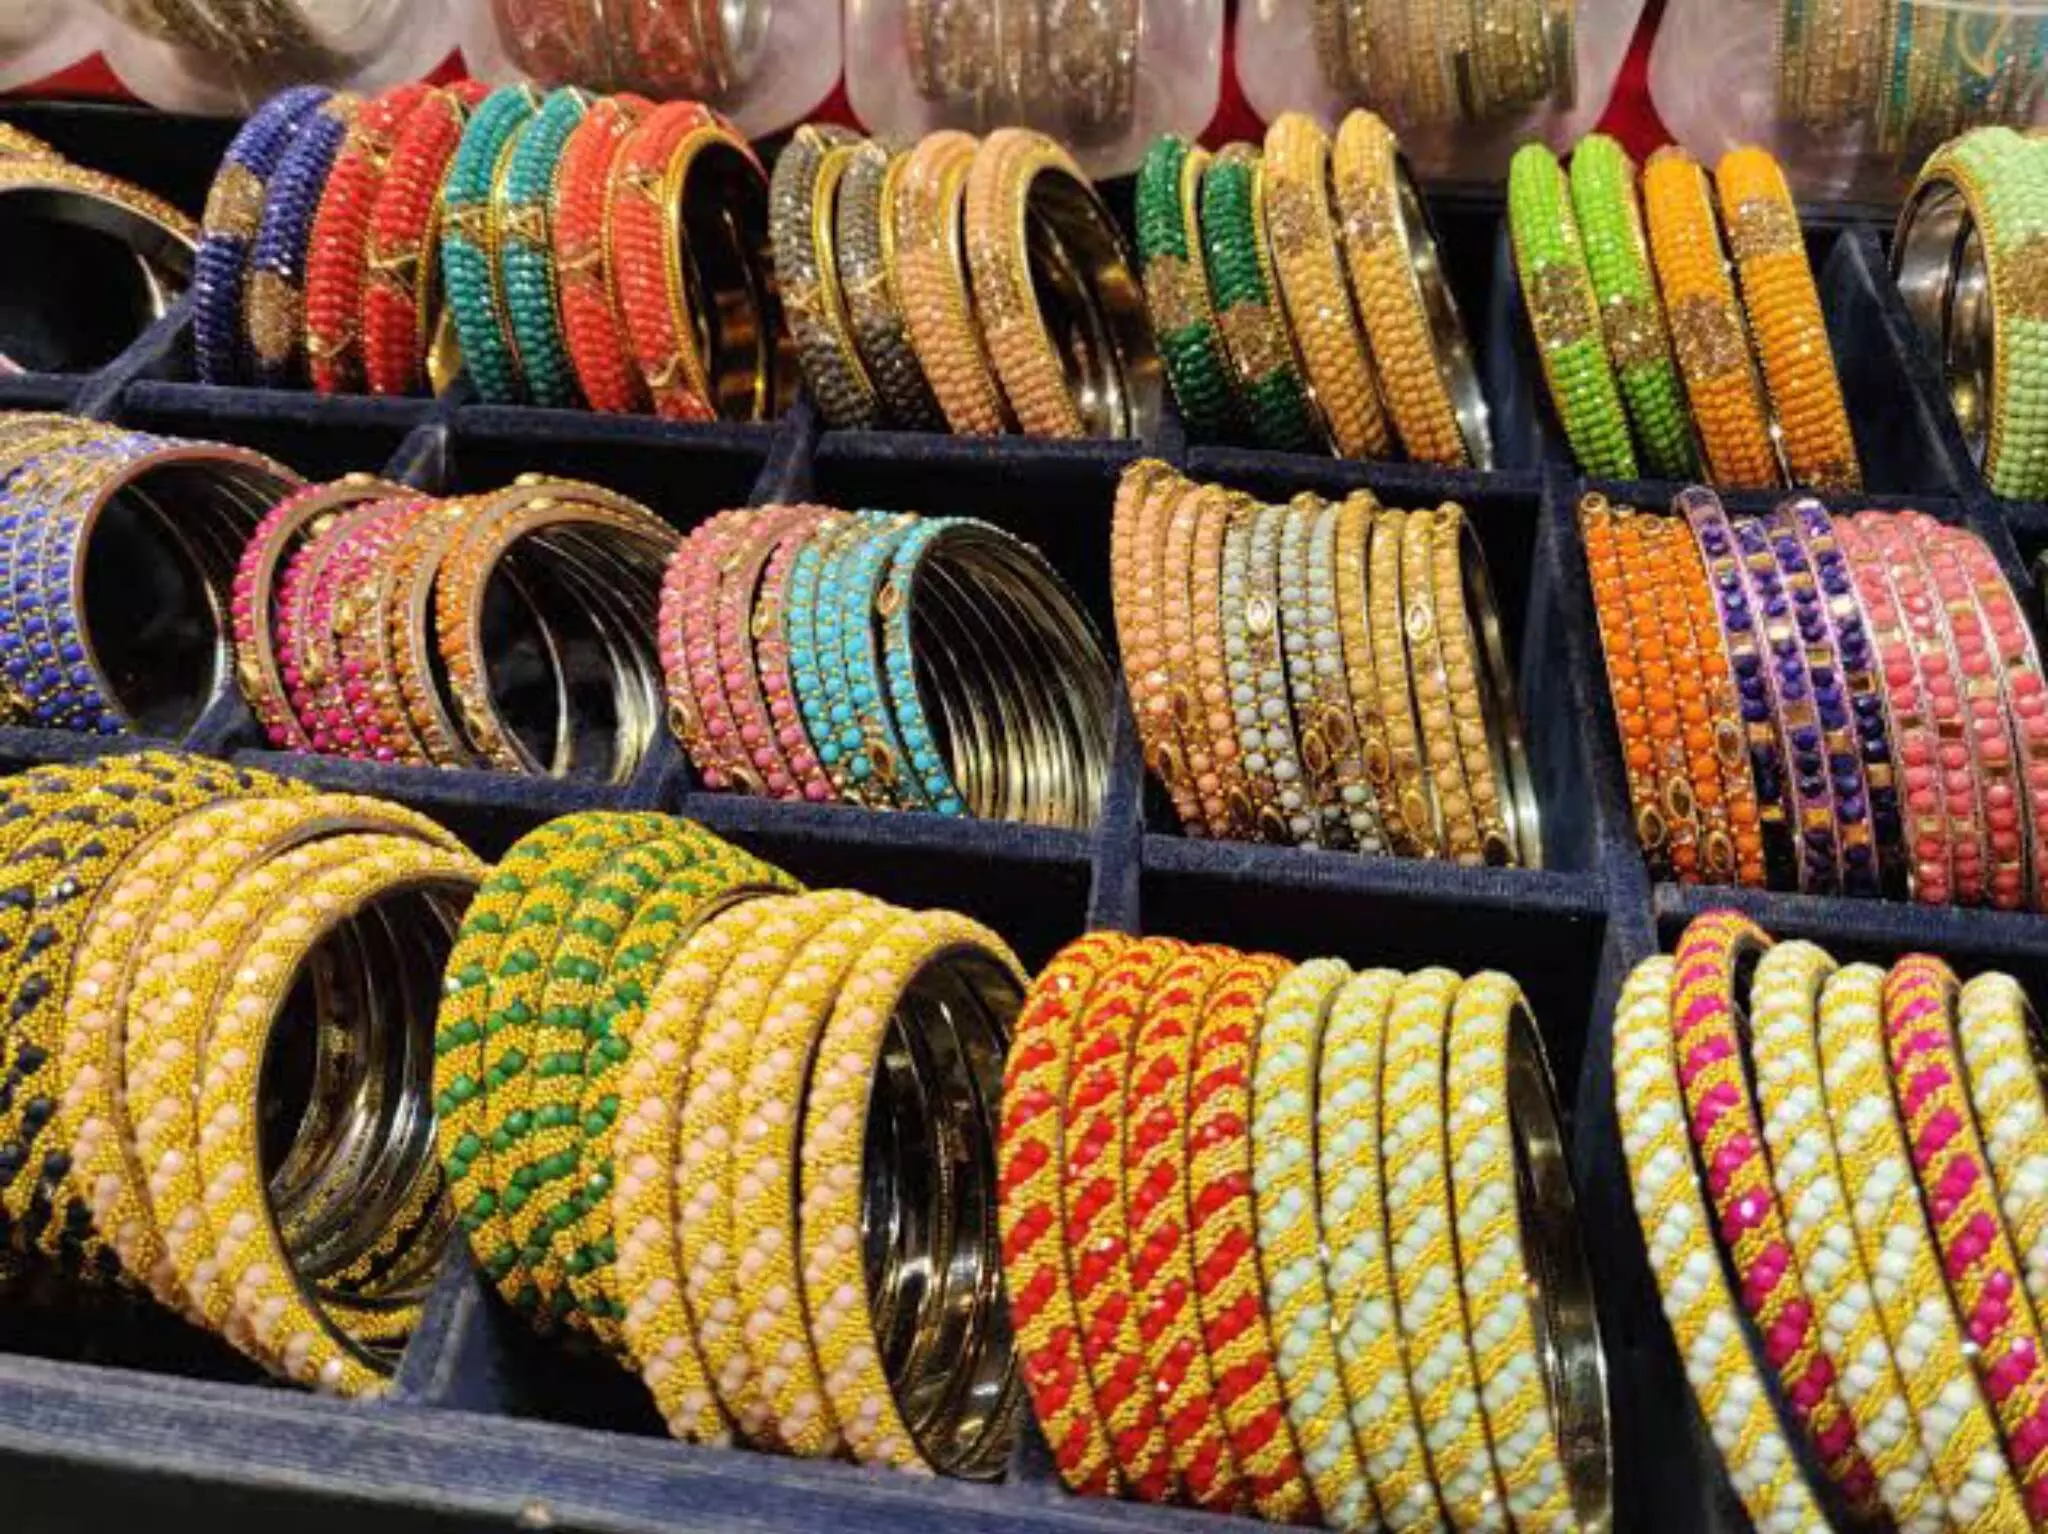 Hyderabad lac bangles from Laad bazaar get GI tag, 17th product to get recognition